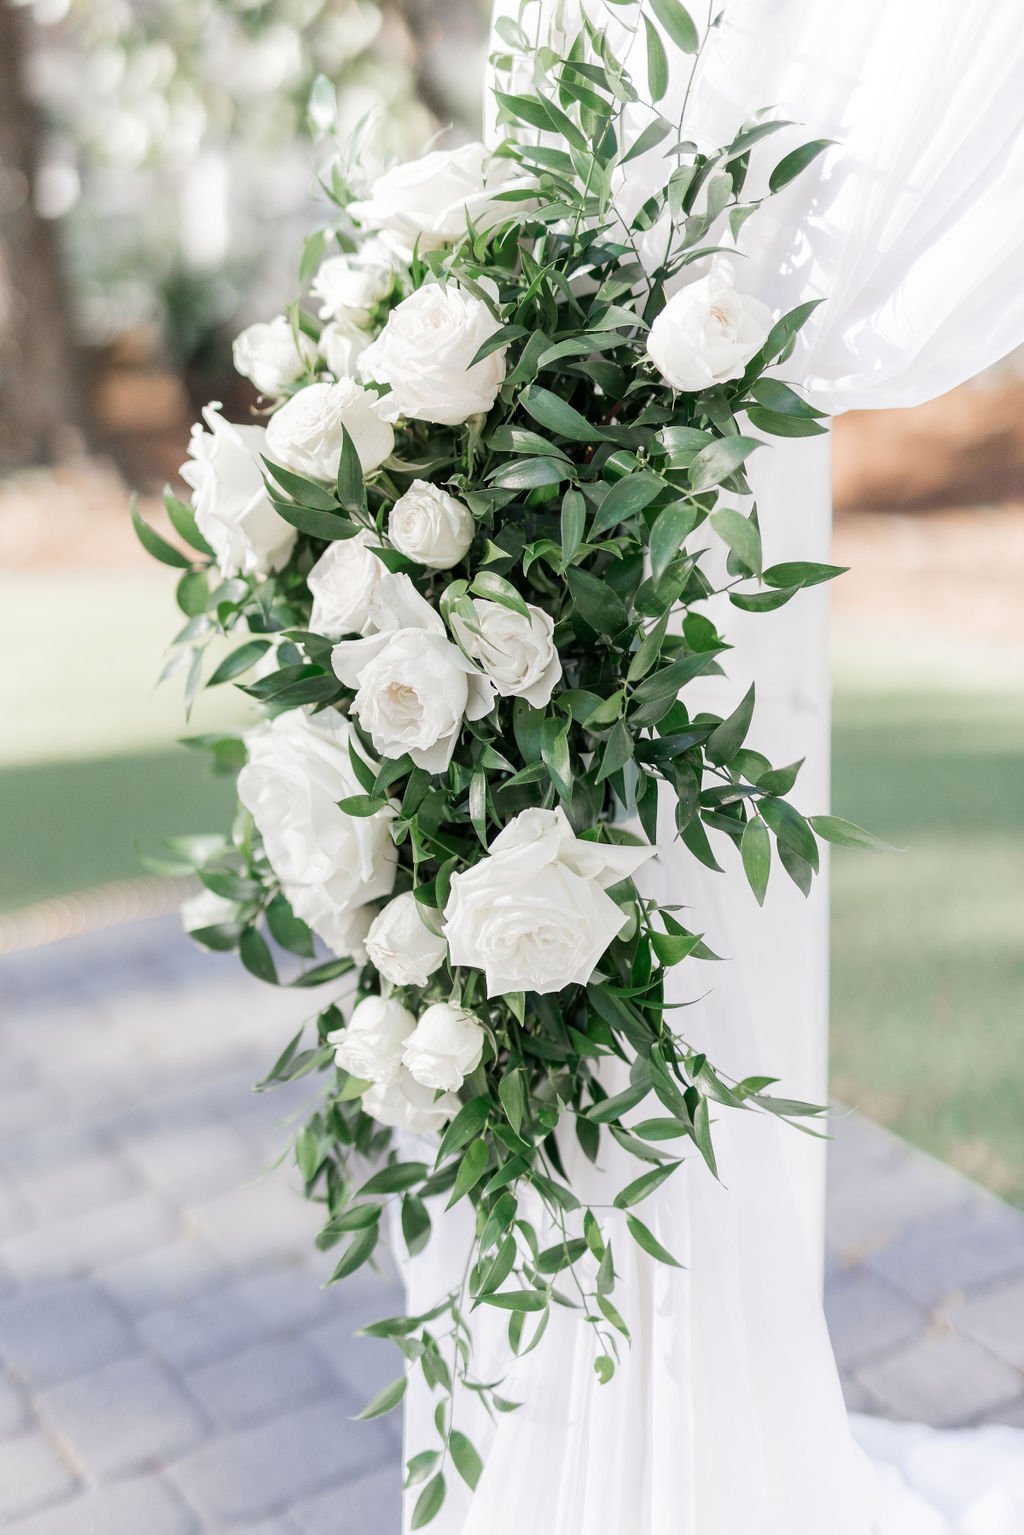 rachel-and-jarrods-classic-white-wedding-florals-designed-by-savannah-florist-ivory-and-beau-for-elegant-wedding-at-the-mackey-house-23.jpg